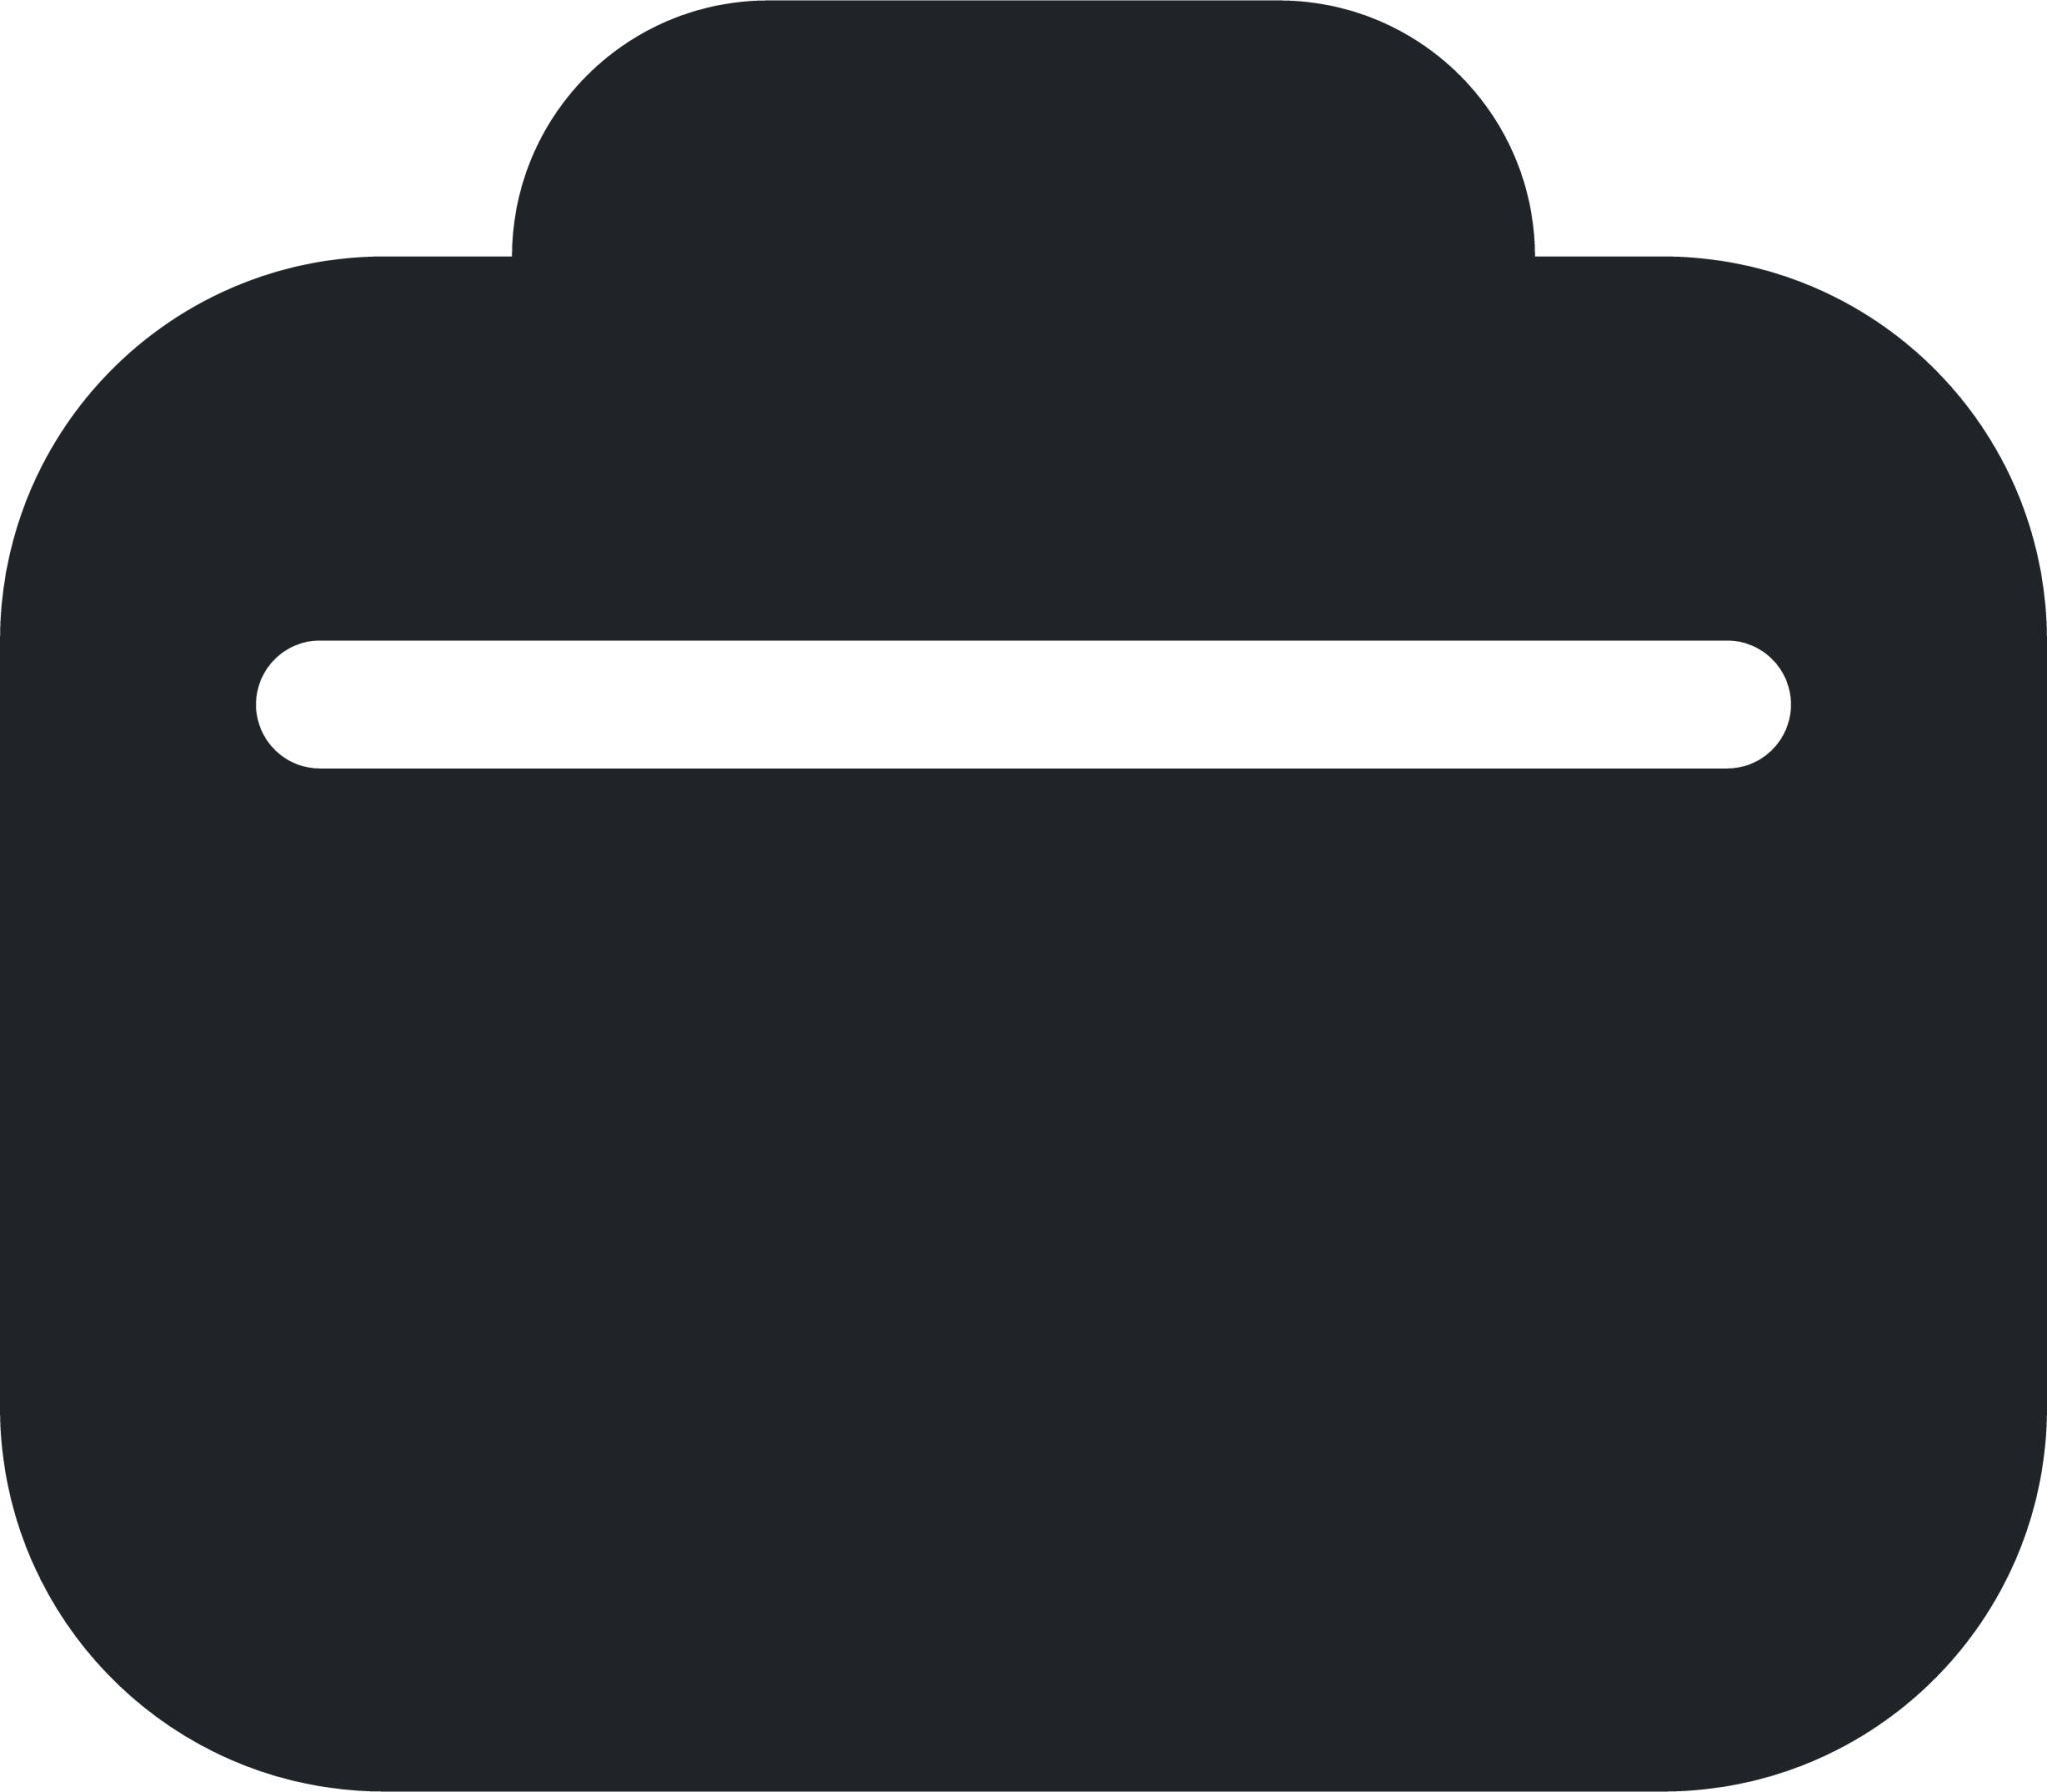 filepackage (rounded filled) icon